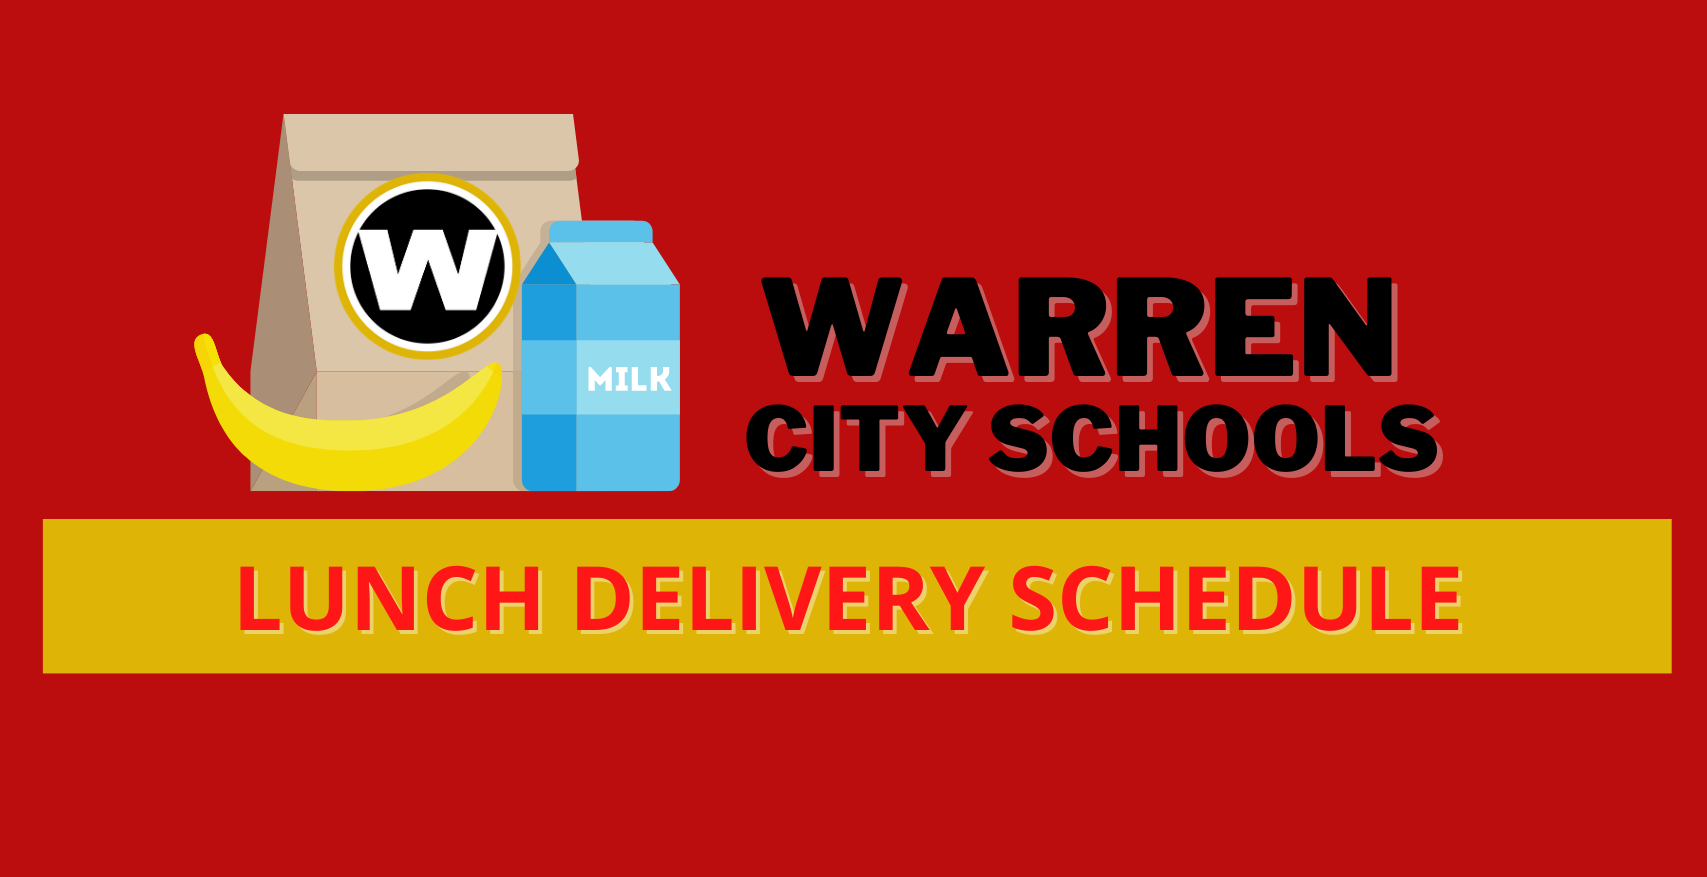 UPDATED Nov. 20, 2020: FALL 2020 Lunch Delivery Schedule